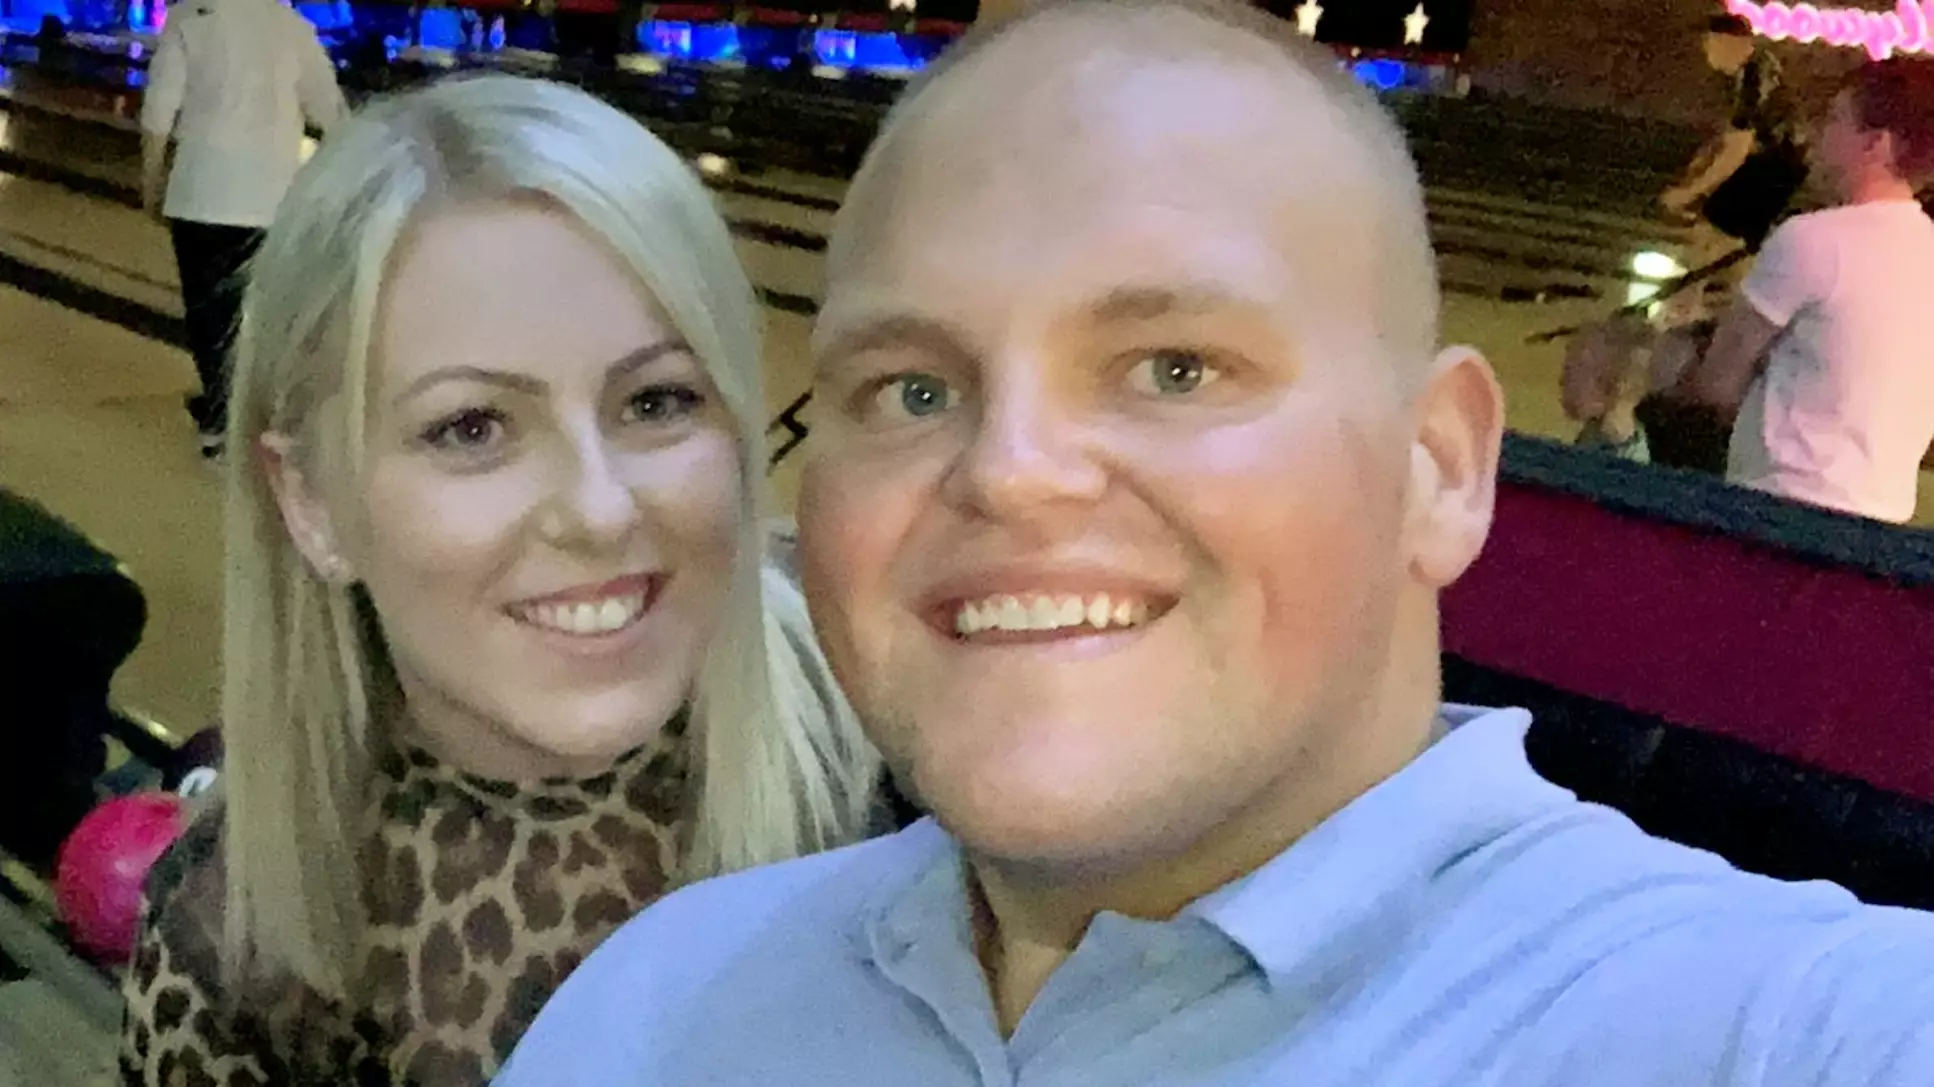 Man Who Lost 20 Stone In 12 Months Gets Himself An 'Amazing' Girlfriend